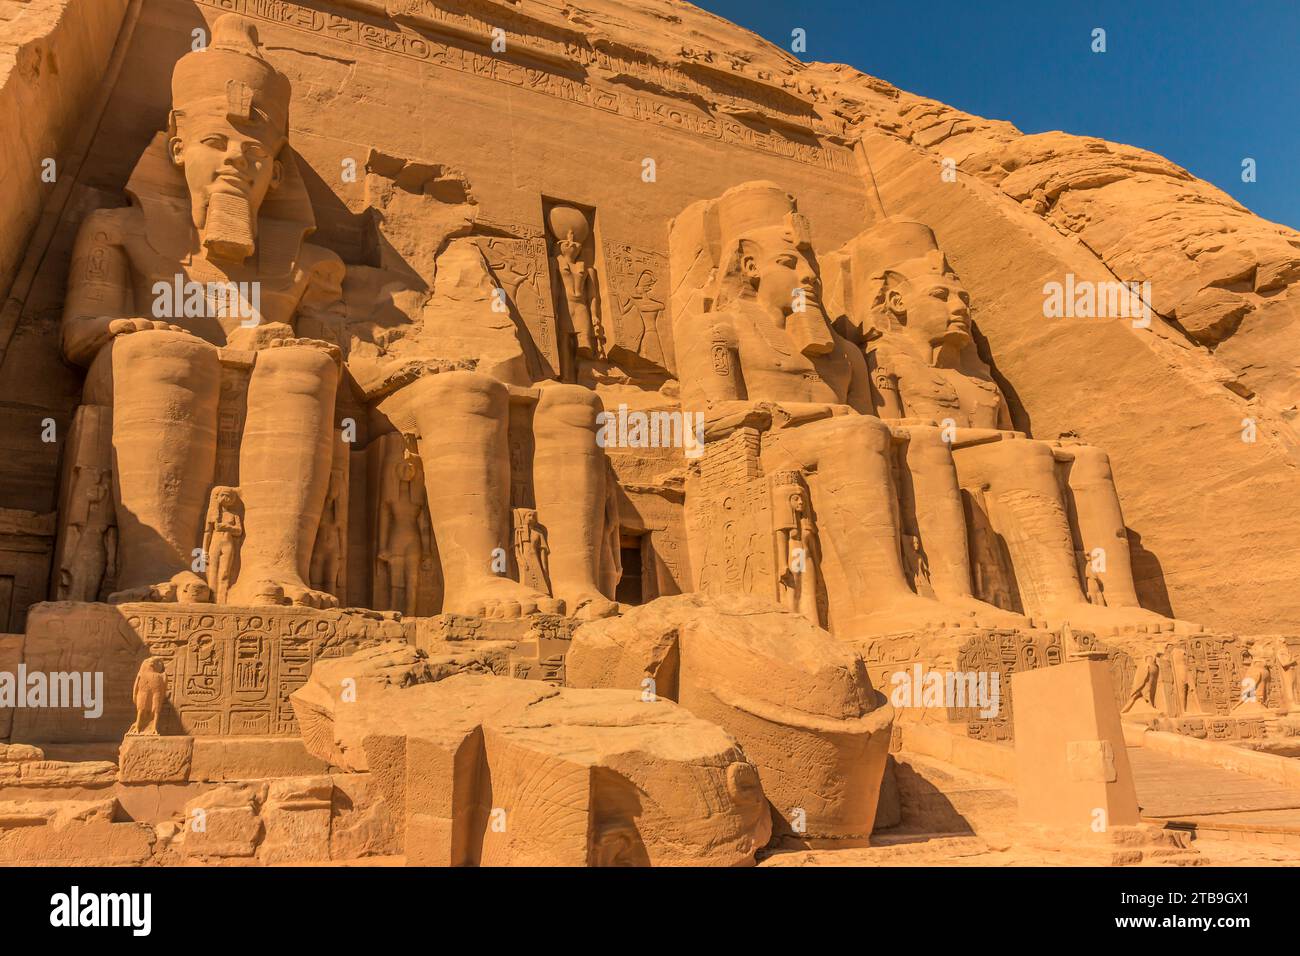 The four colossi of Ramesses II at the entrance of the the Temple of Ramesses II at Abu Simbel; Abu Simbel, Nubia, Egypt Stock Photo